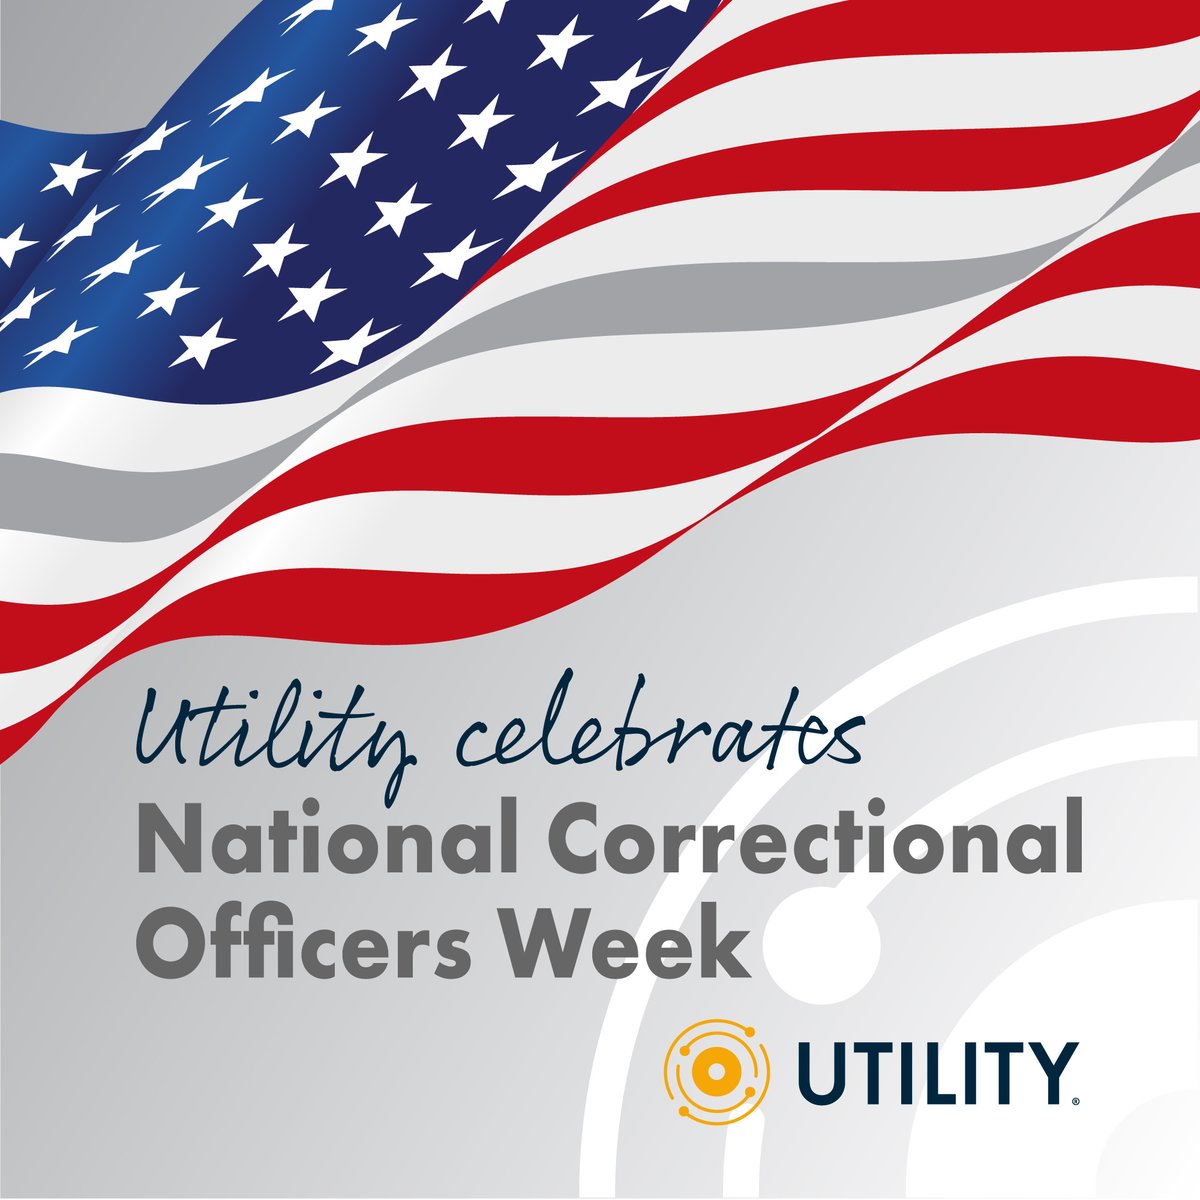 This National Corrections Officers Week, we want to extend our deepest gratitude to the brave men and women who work tirelessly to ensure safety within our correctional facilities #CorrectionsOfficersWeek #Corrections